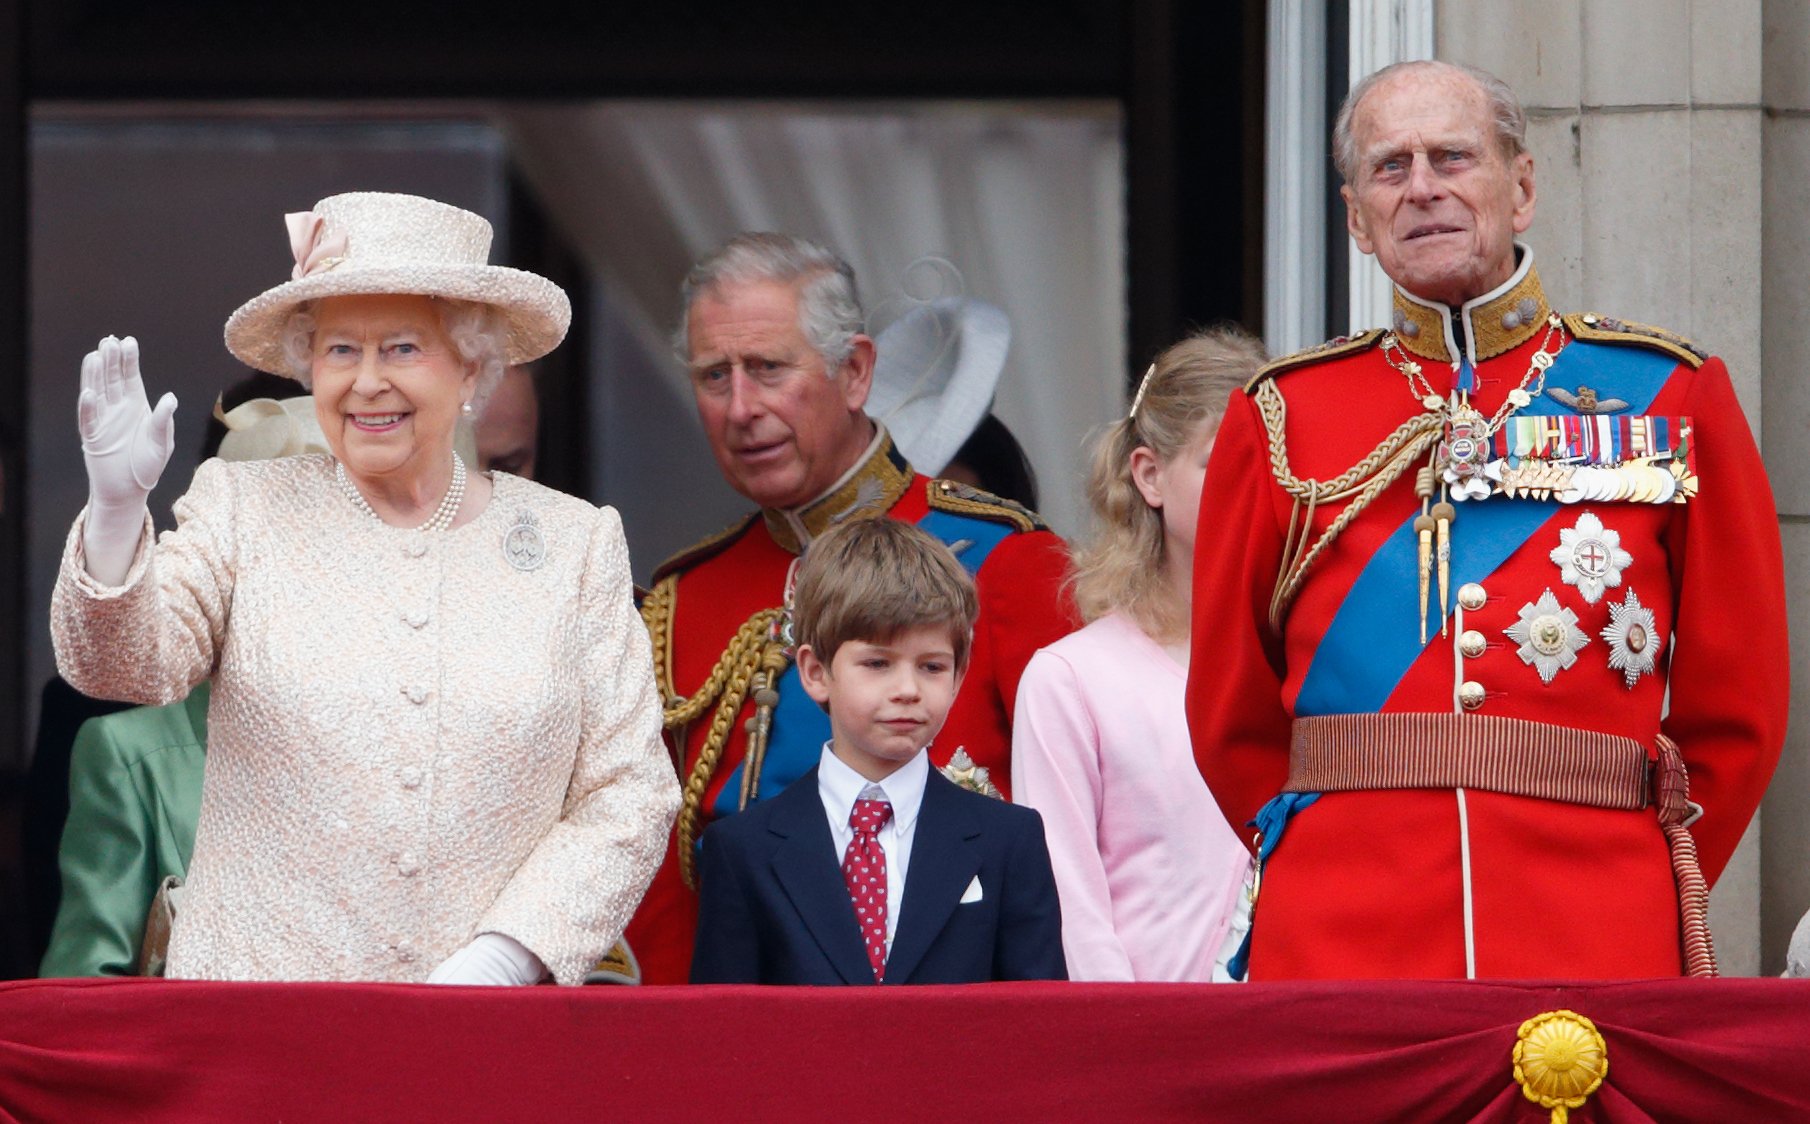 Queen Elizabeth II, James, Viscount Severn, Prince Philip, Lady Louise and Prince Charles stand on the balcony of Buckingham Palace during Trooping the Color on June 13, 2015 in London, England | Source: Getty Images